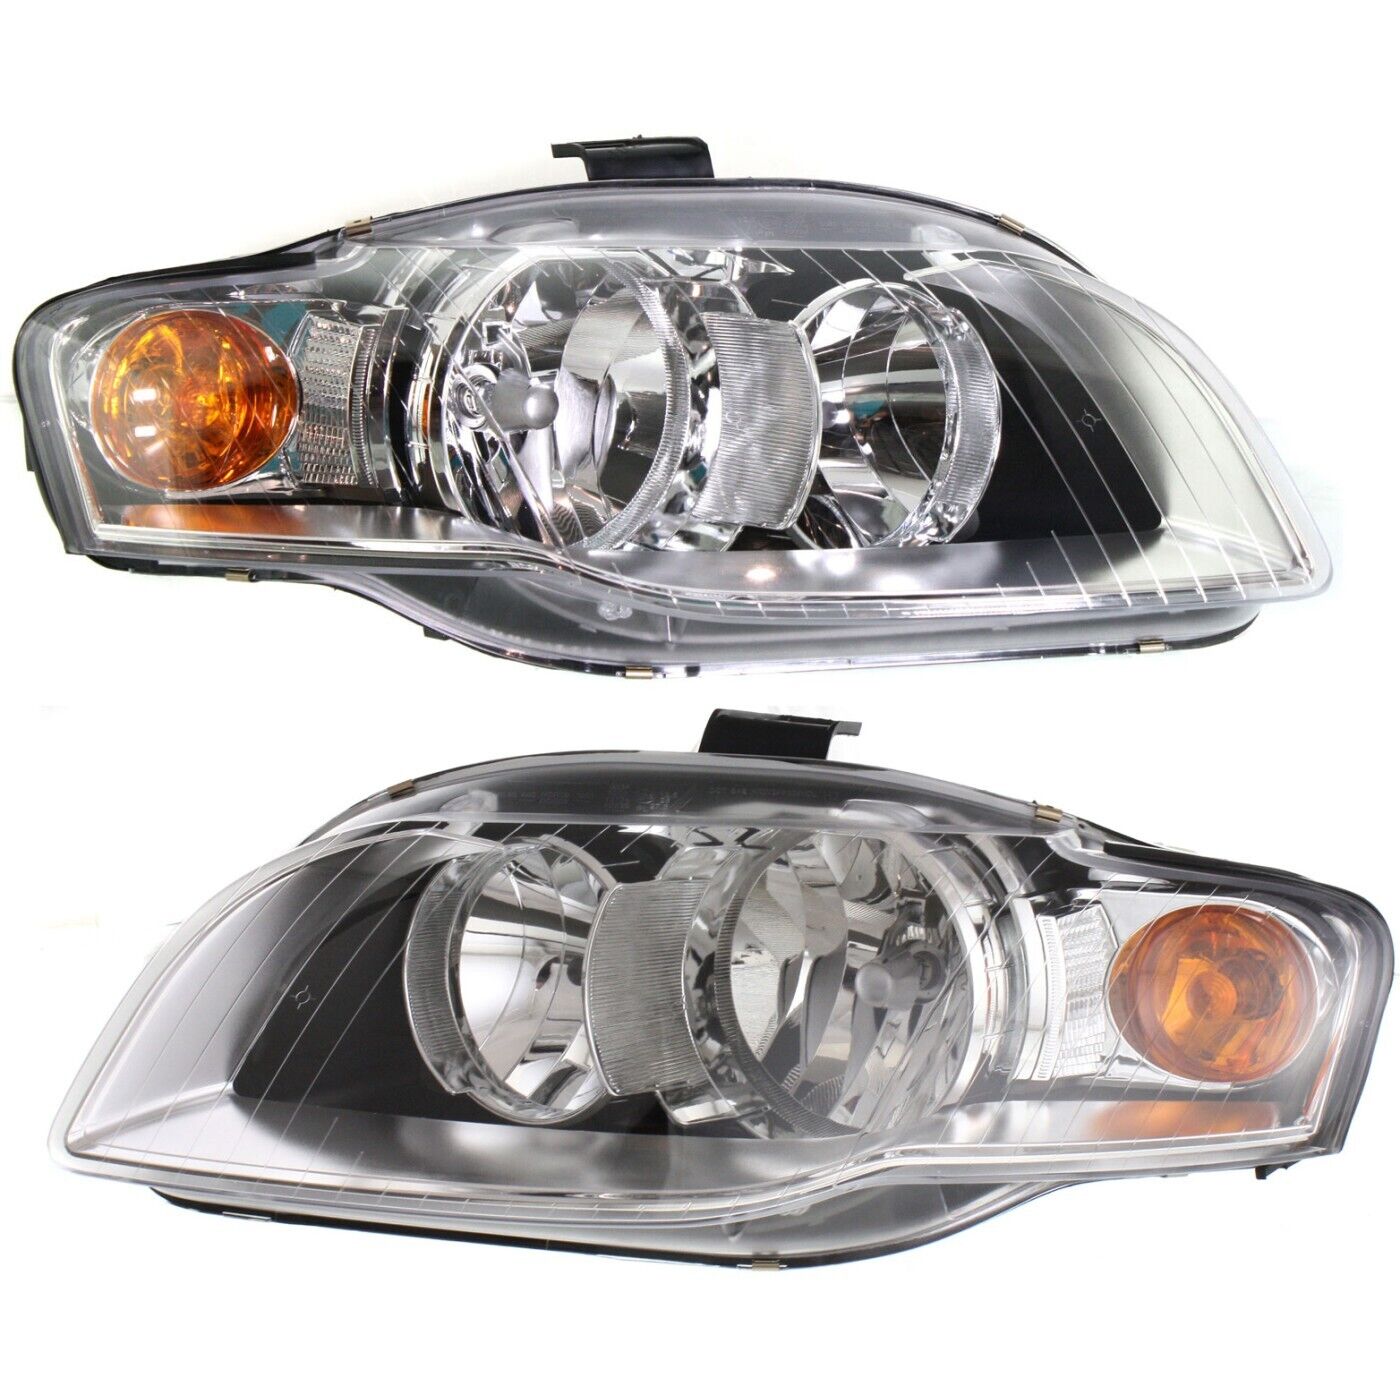 Halogen Headlight Set Left and Right For Audi B7 Body 2005-2009 A4 Quattro A4